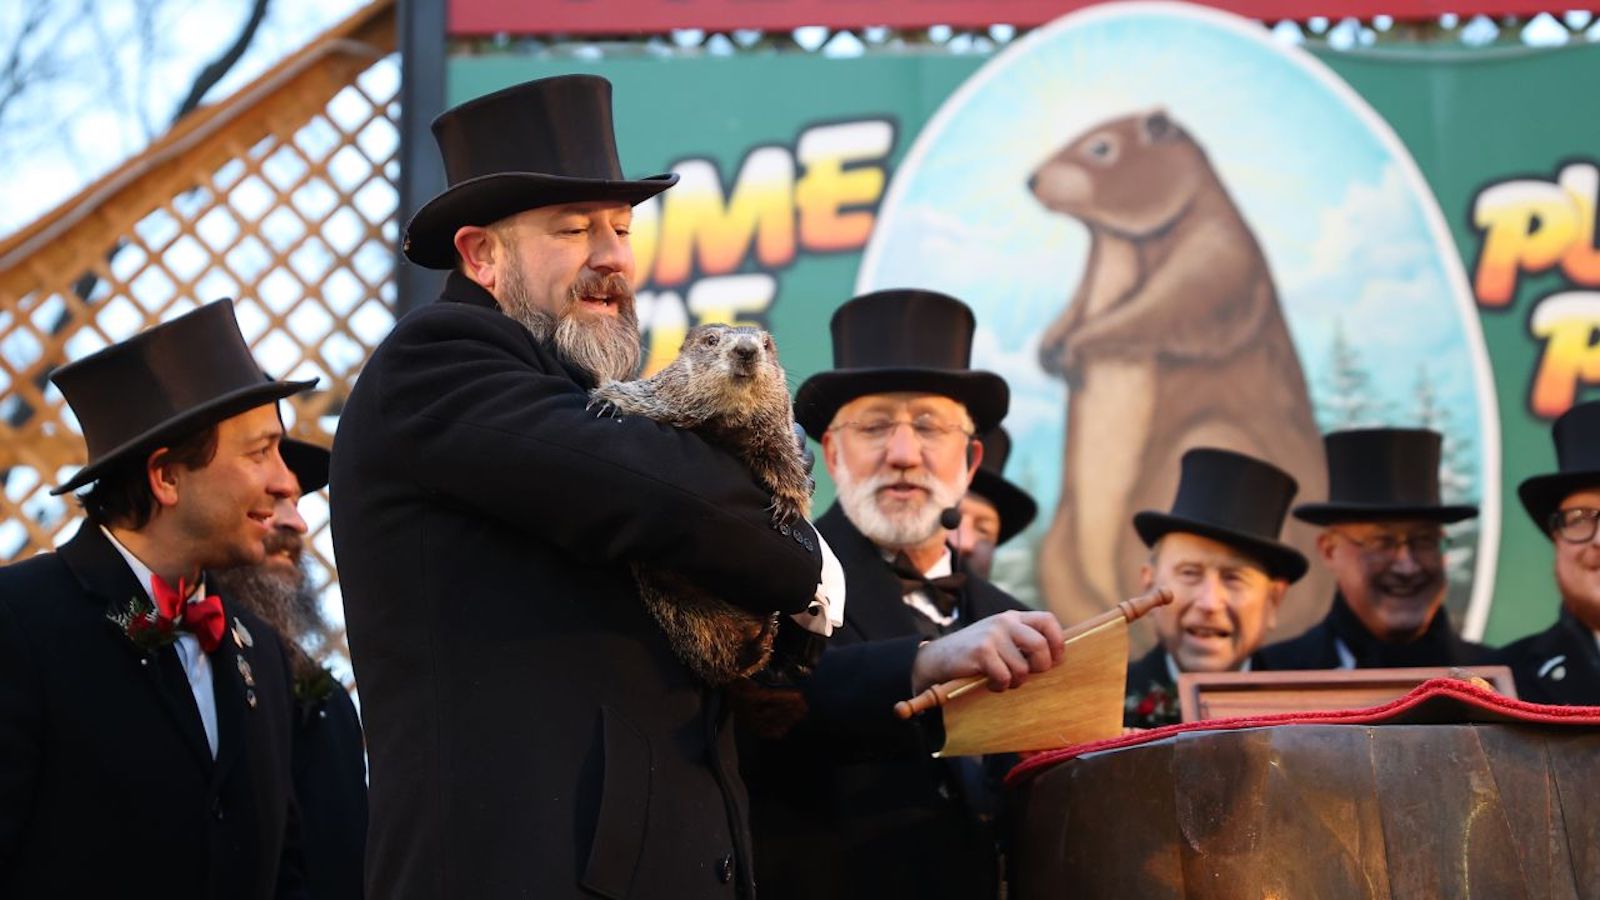 What is Groundhog Day and why is it celebrated?